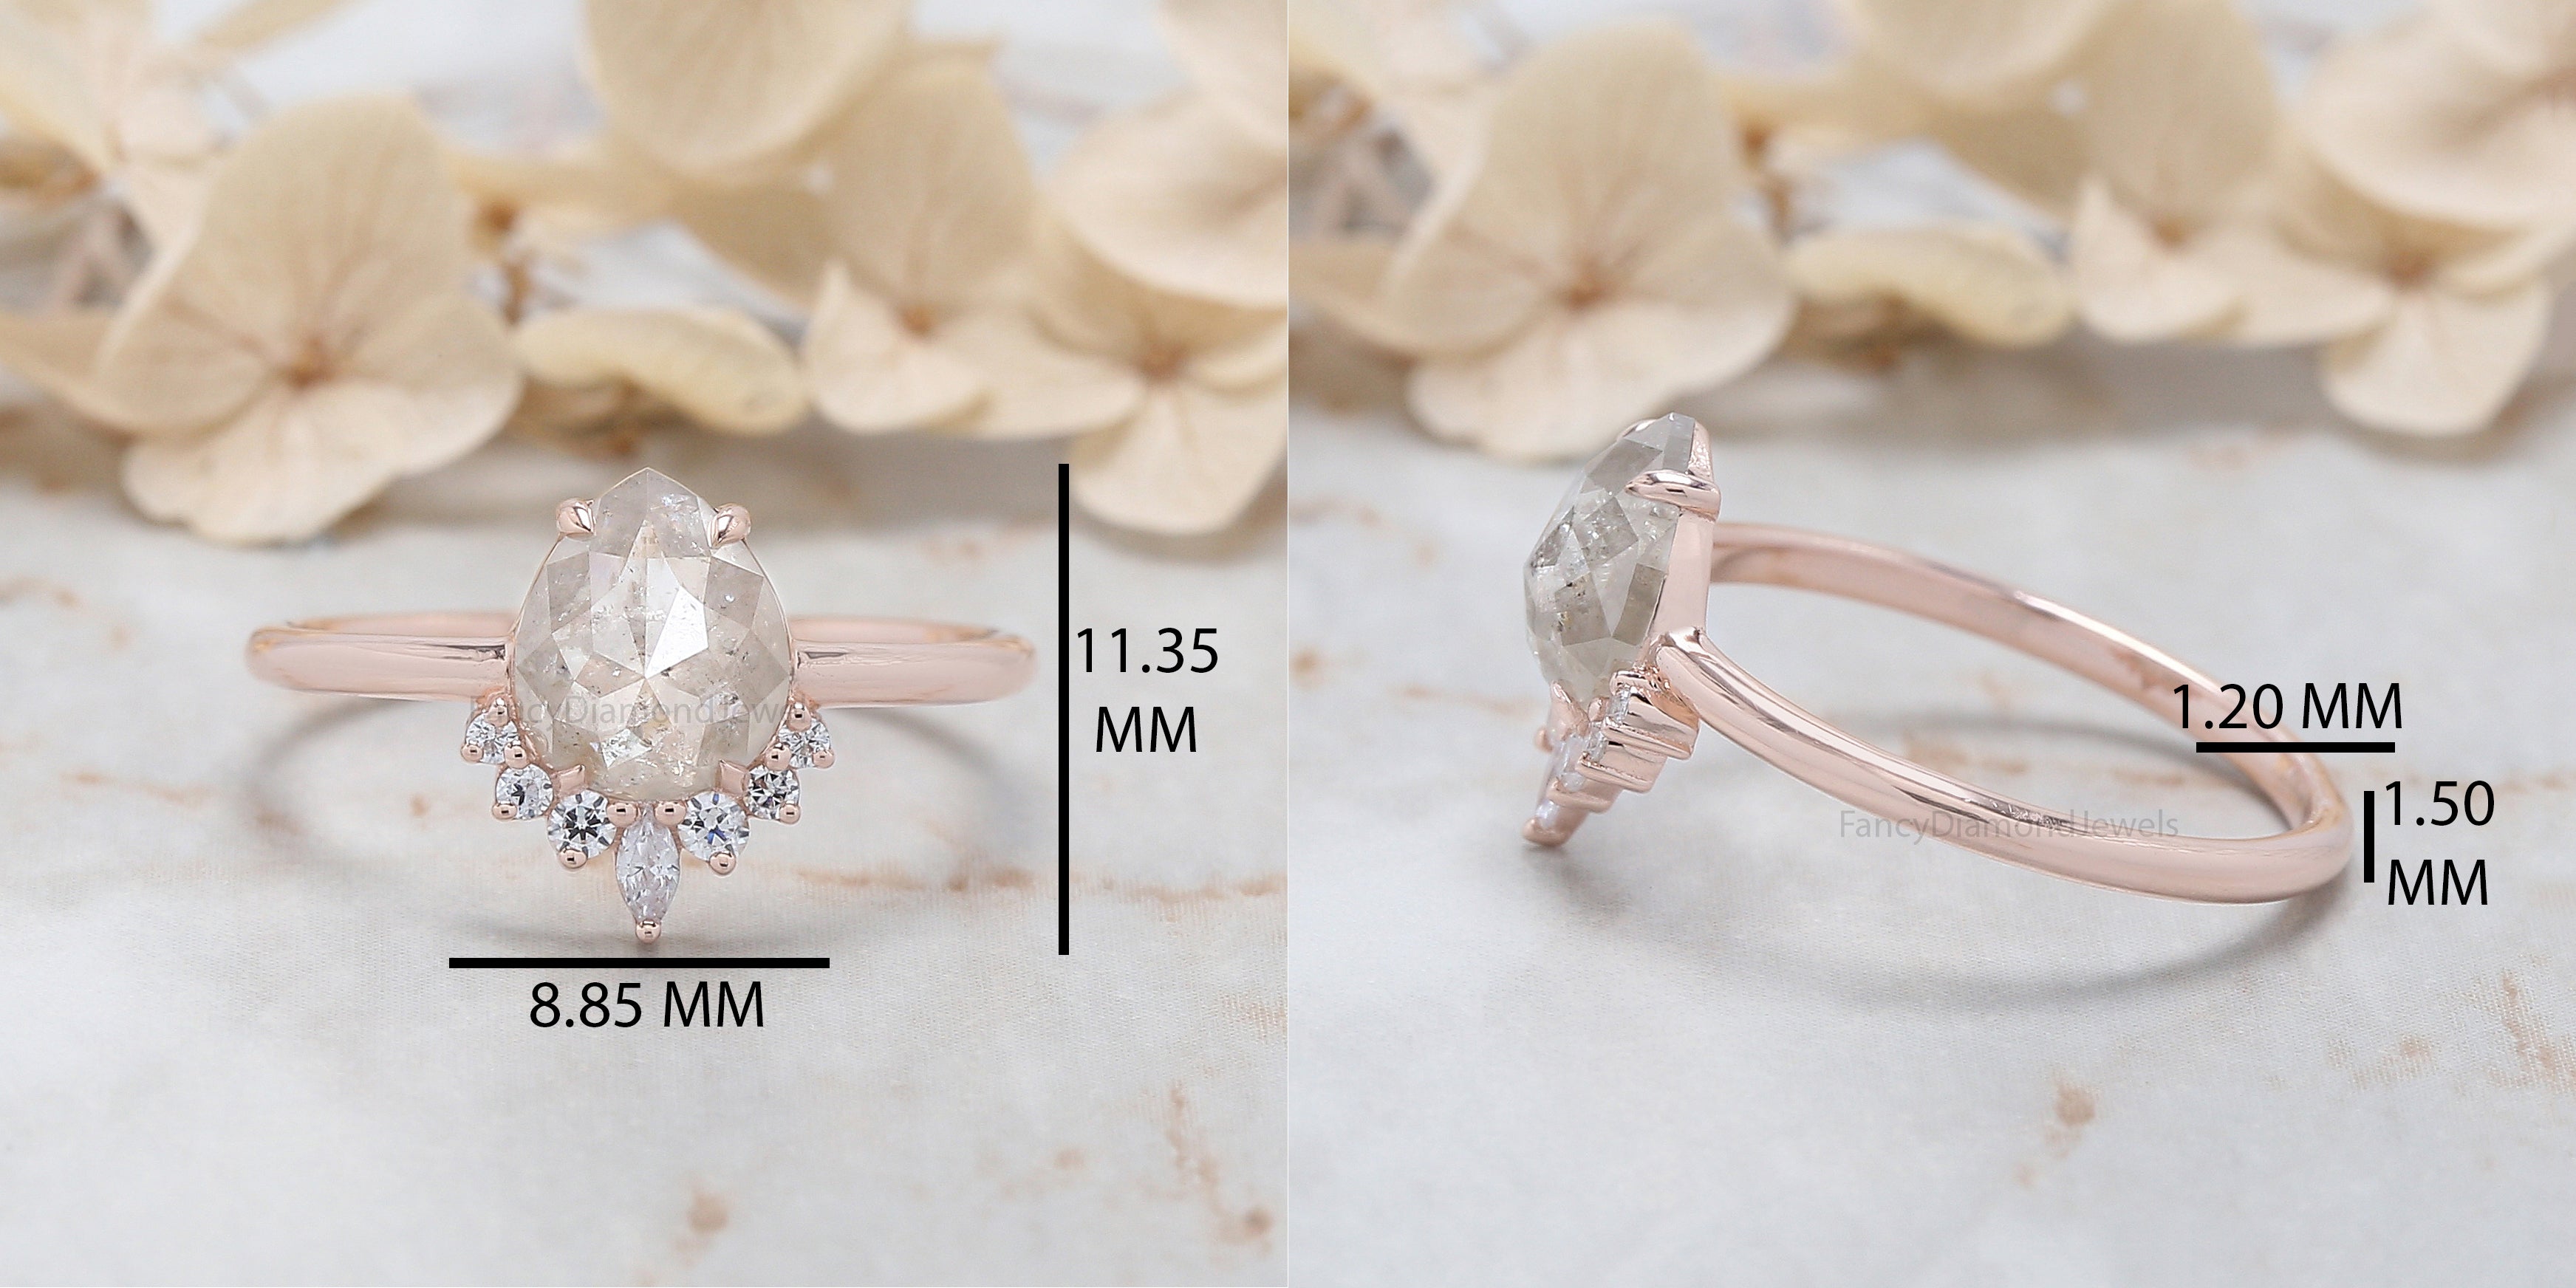 Pear Cut Grey Color Diamond Ring 1.06 Ct 7.80 MM Pear Shape Diamond Ring 14K Solid Rose Gold Silver Pear Engagement Ring Gift For Her QN8862